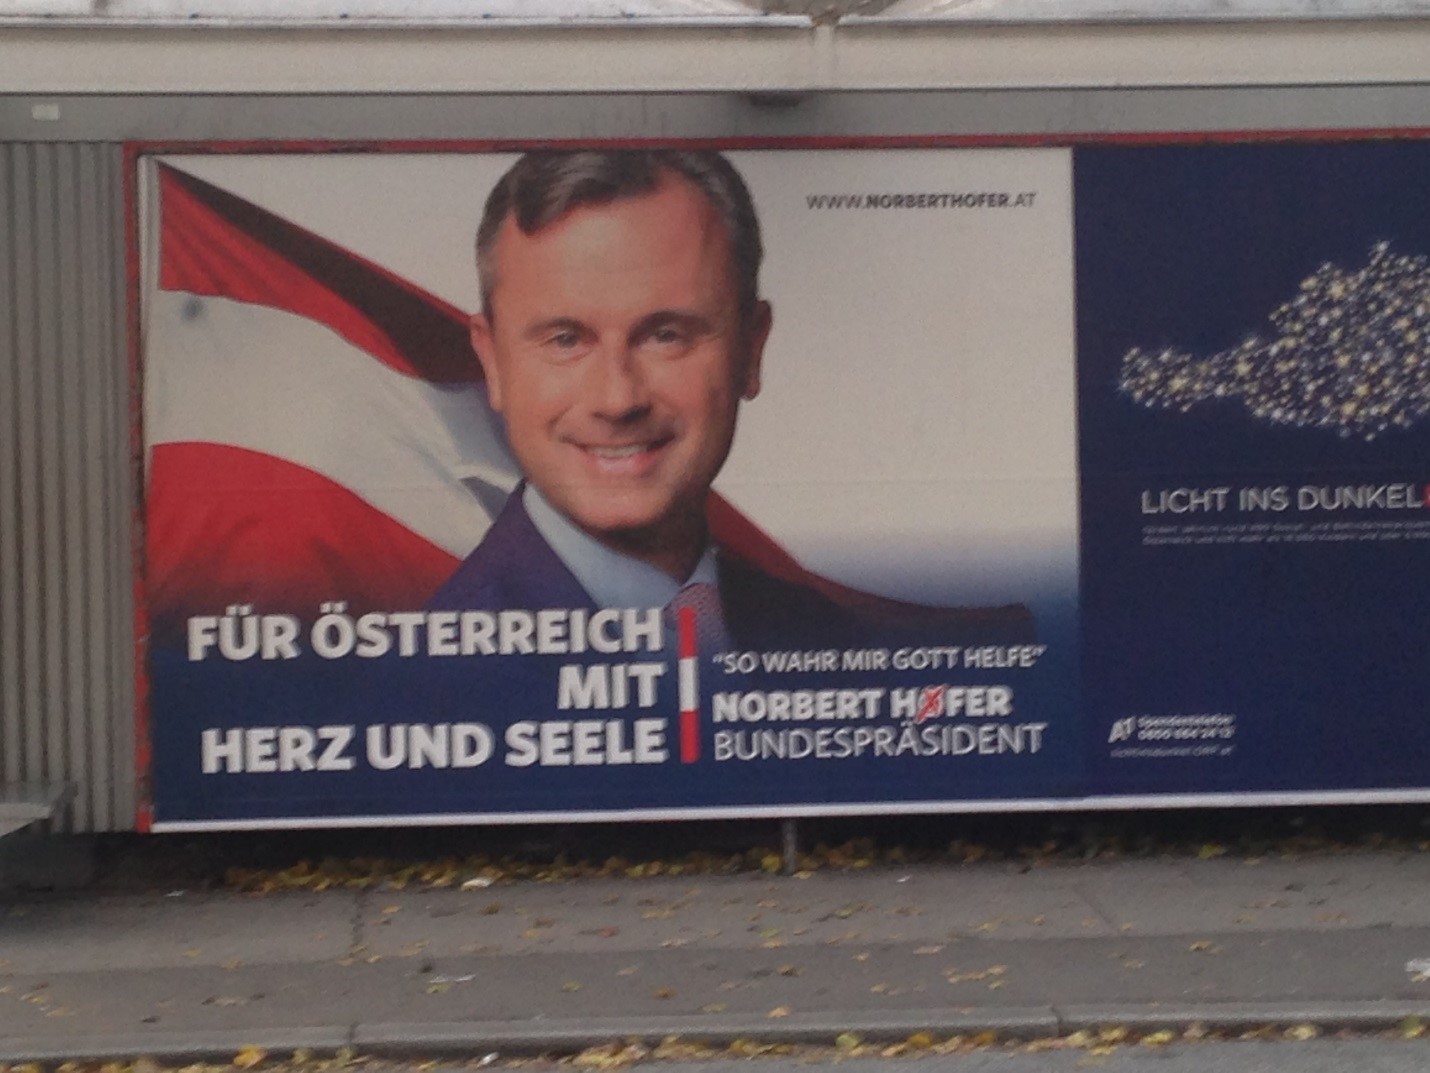 Freedom Party of Austria candidate Norbert Hofer:  “With Heart and Soul for Austria:  So Help Me God.”